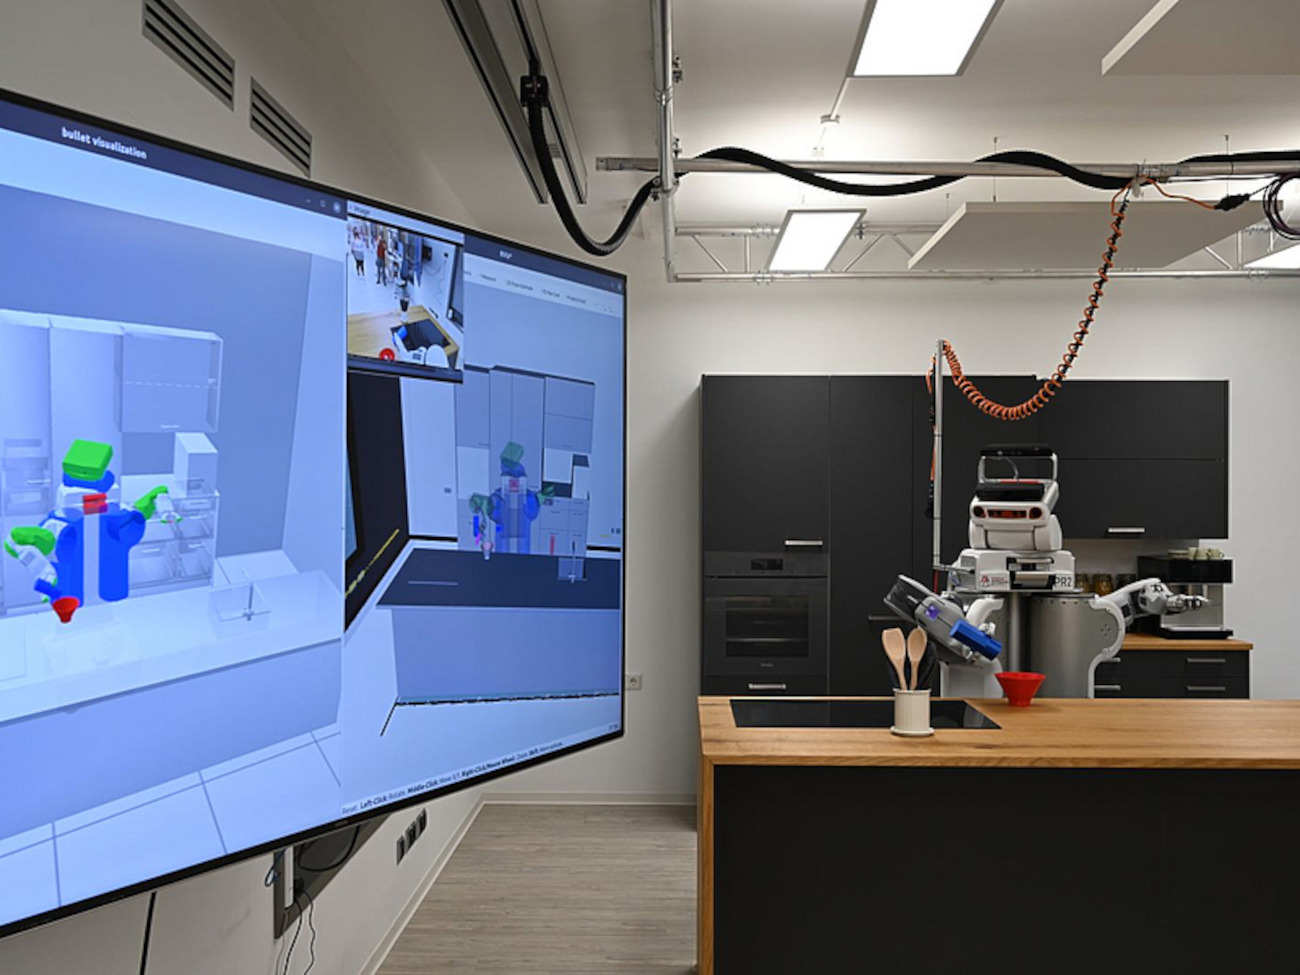 A robot works in a laboratory equipped with a kitchen